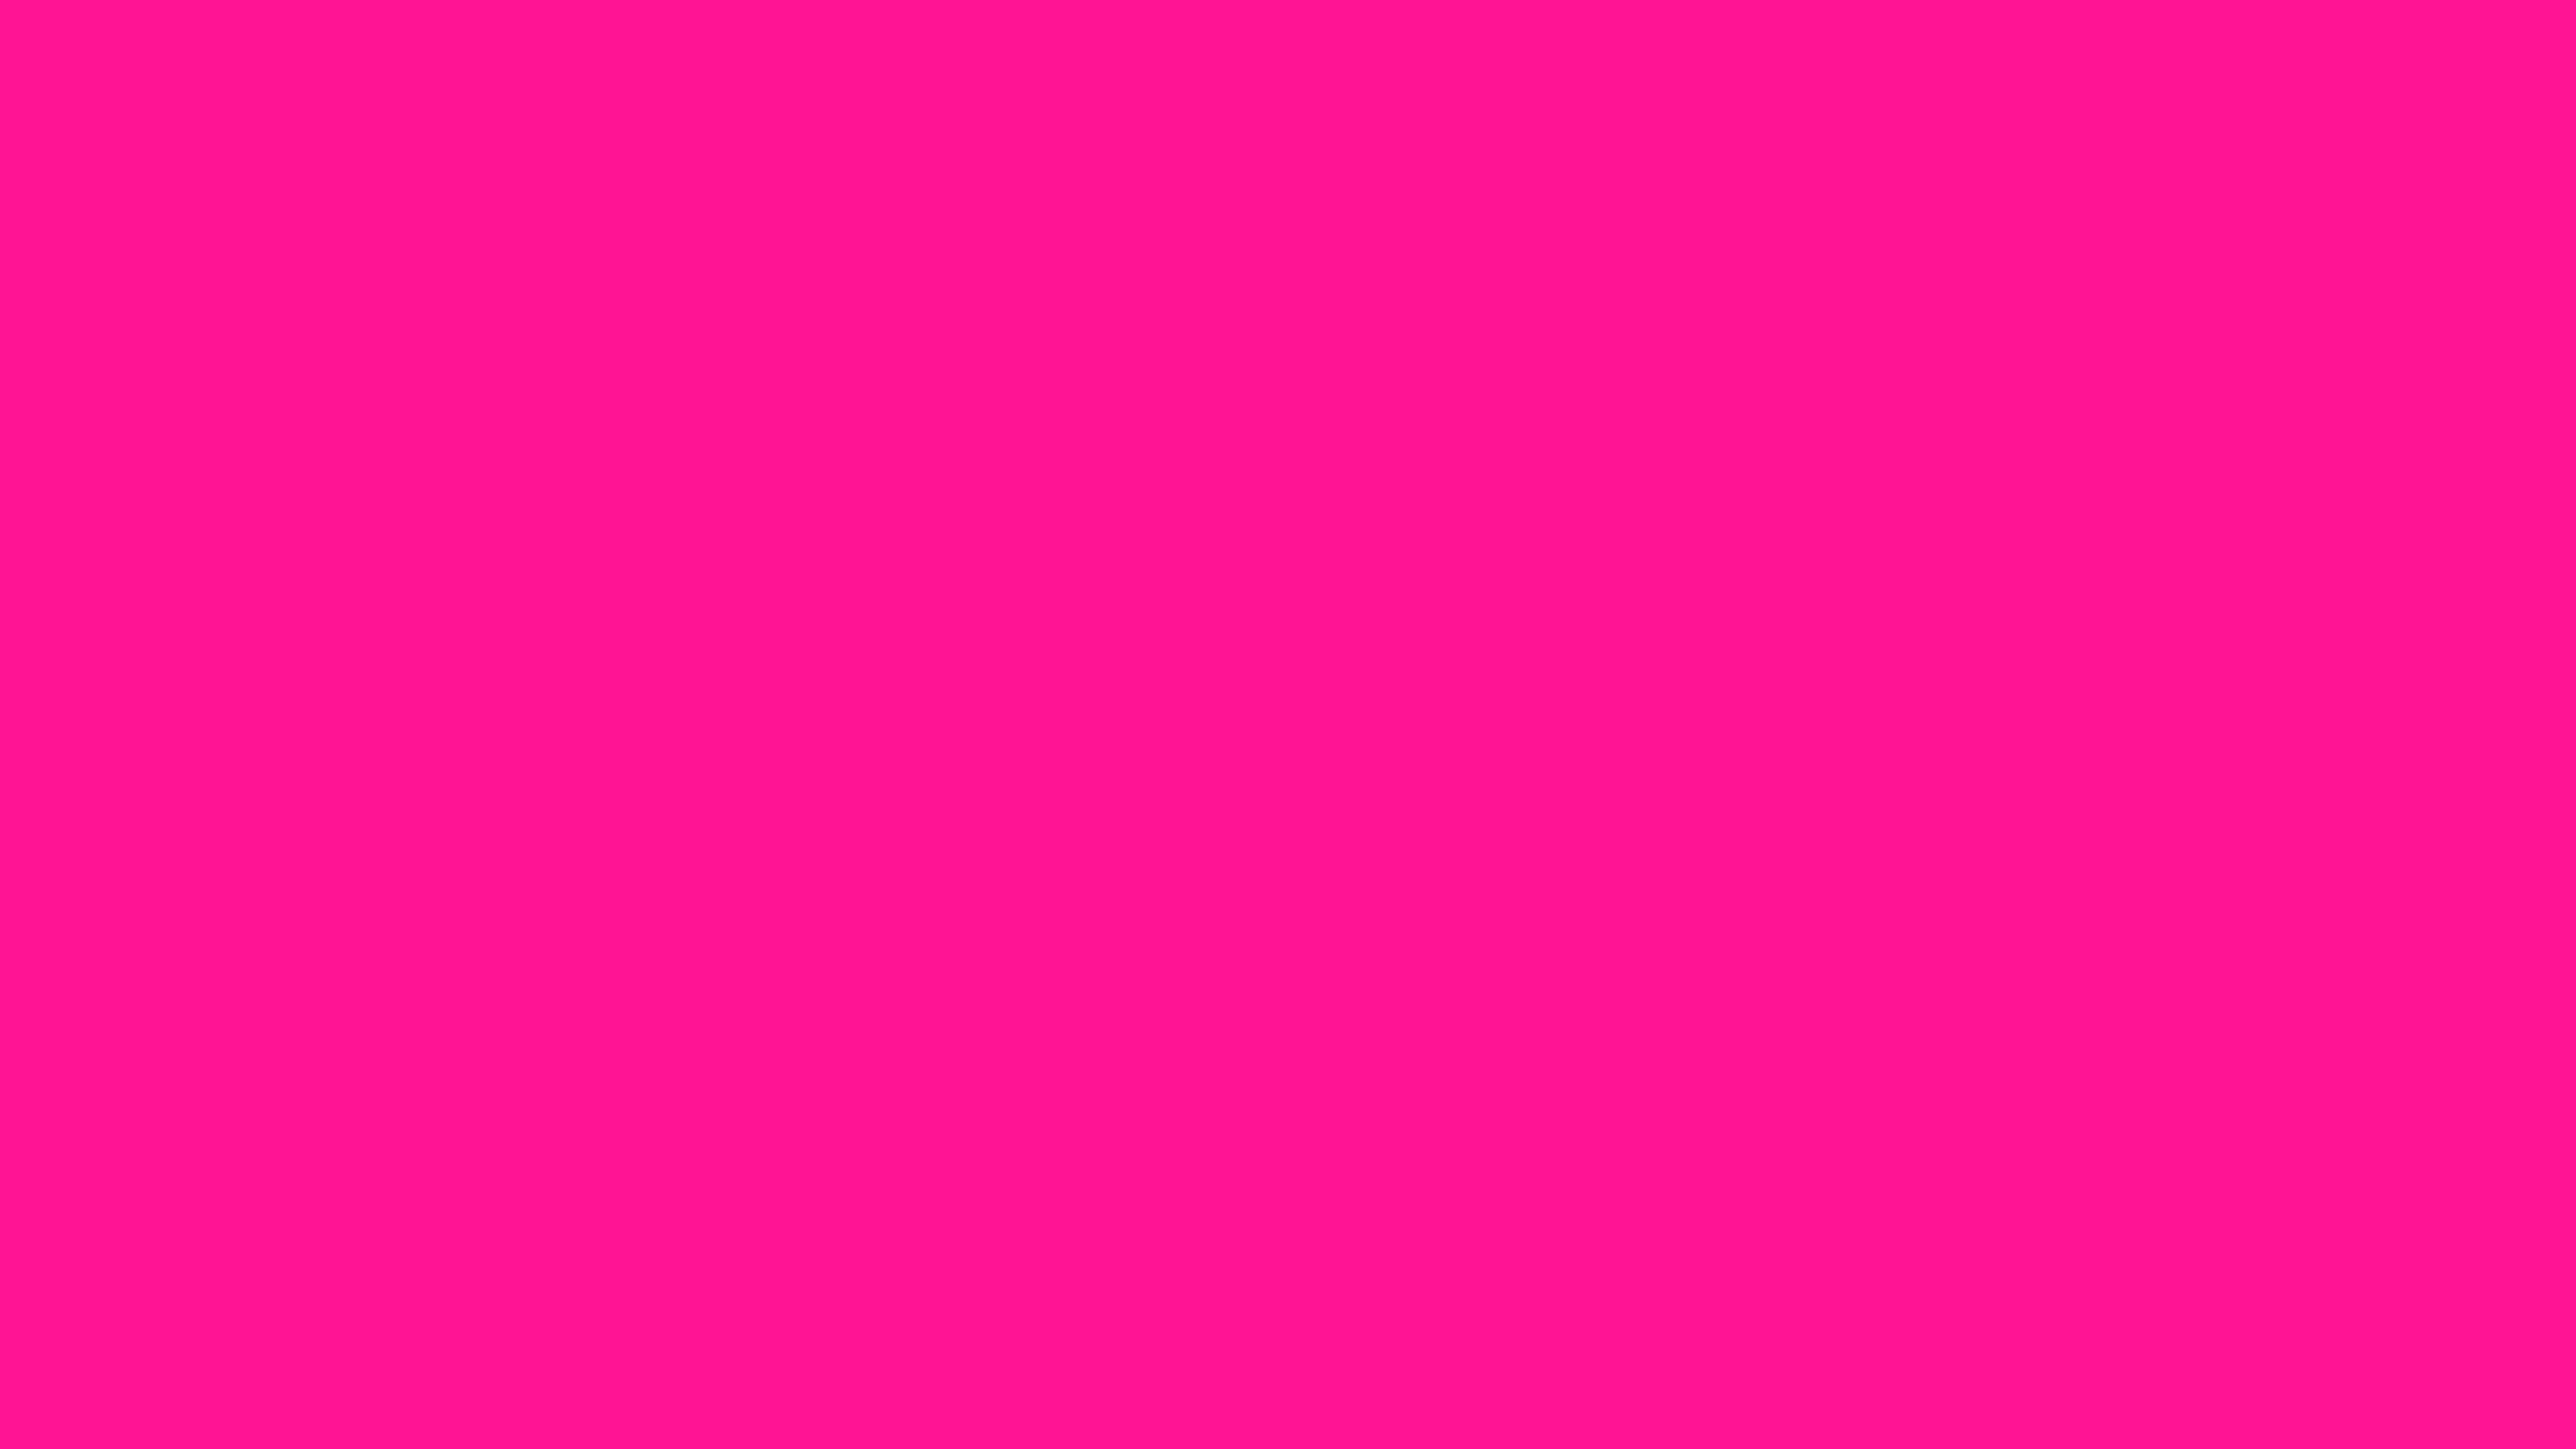 5120x2880 Deep Pink Solid Color Background